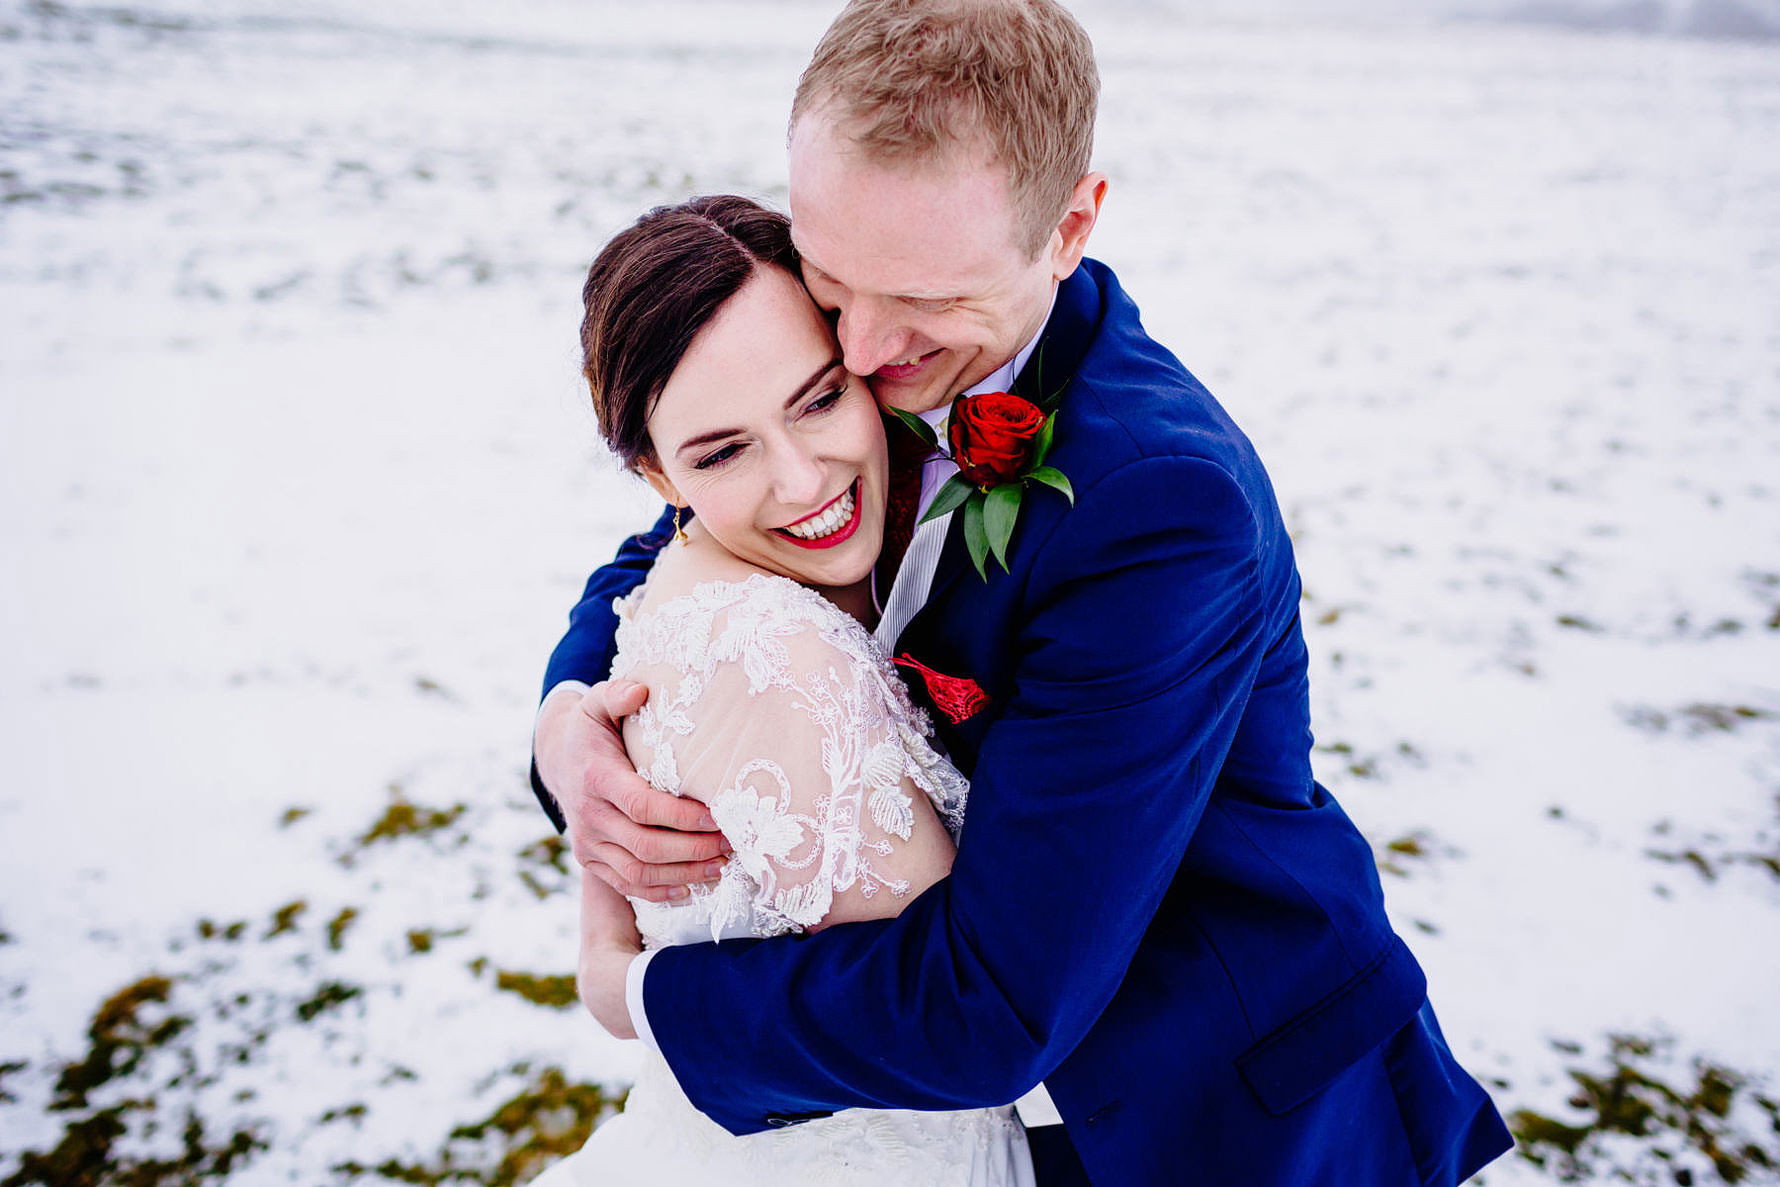 a snowy wedding at Dodford manor